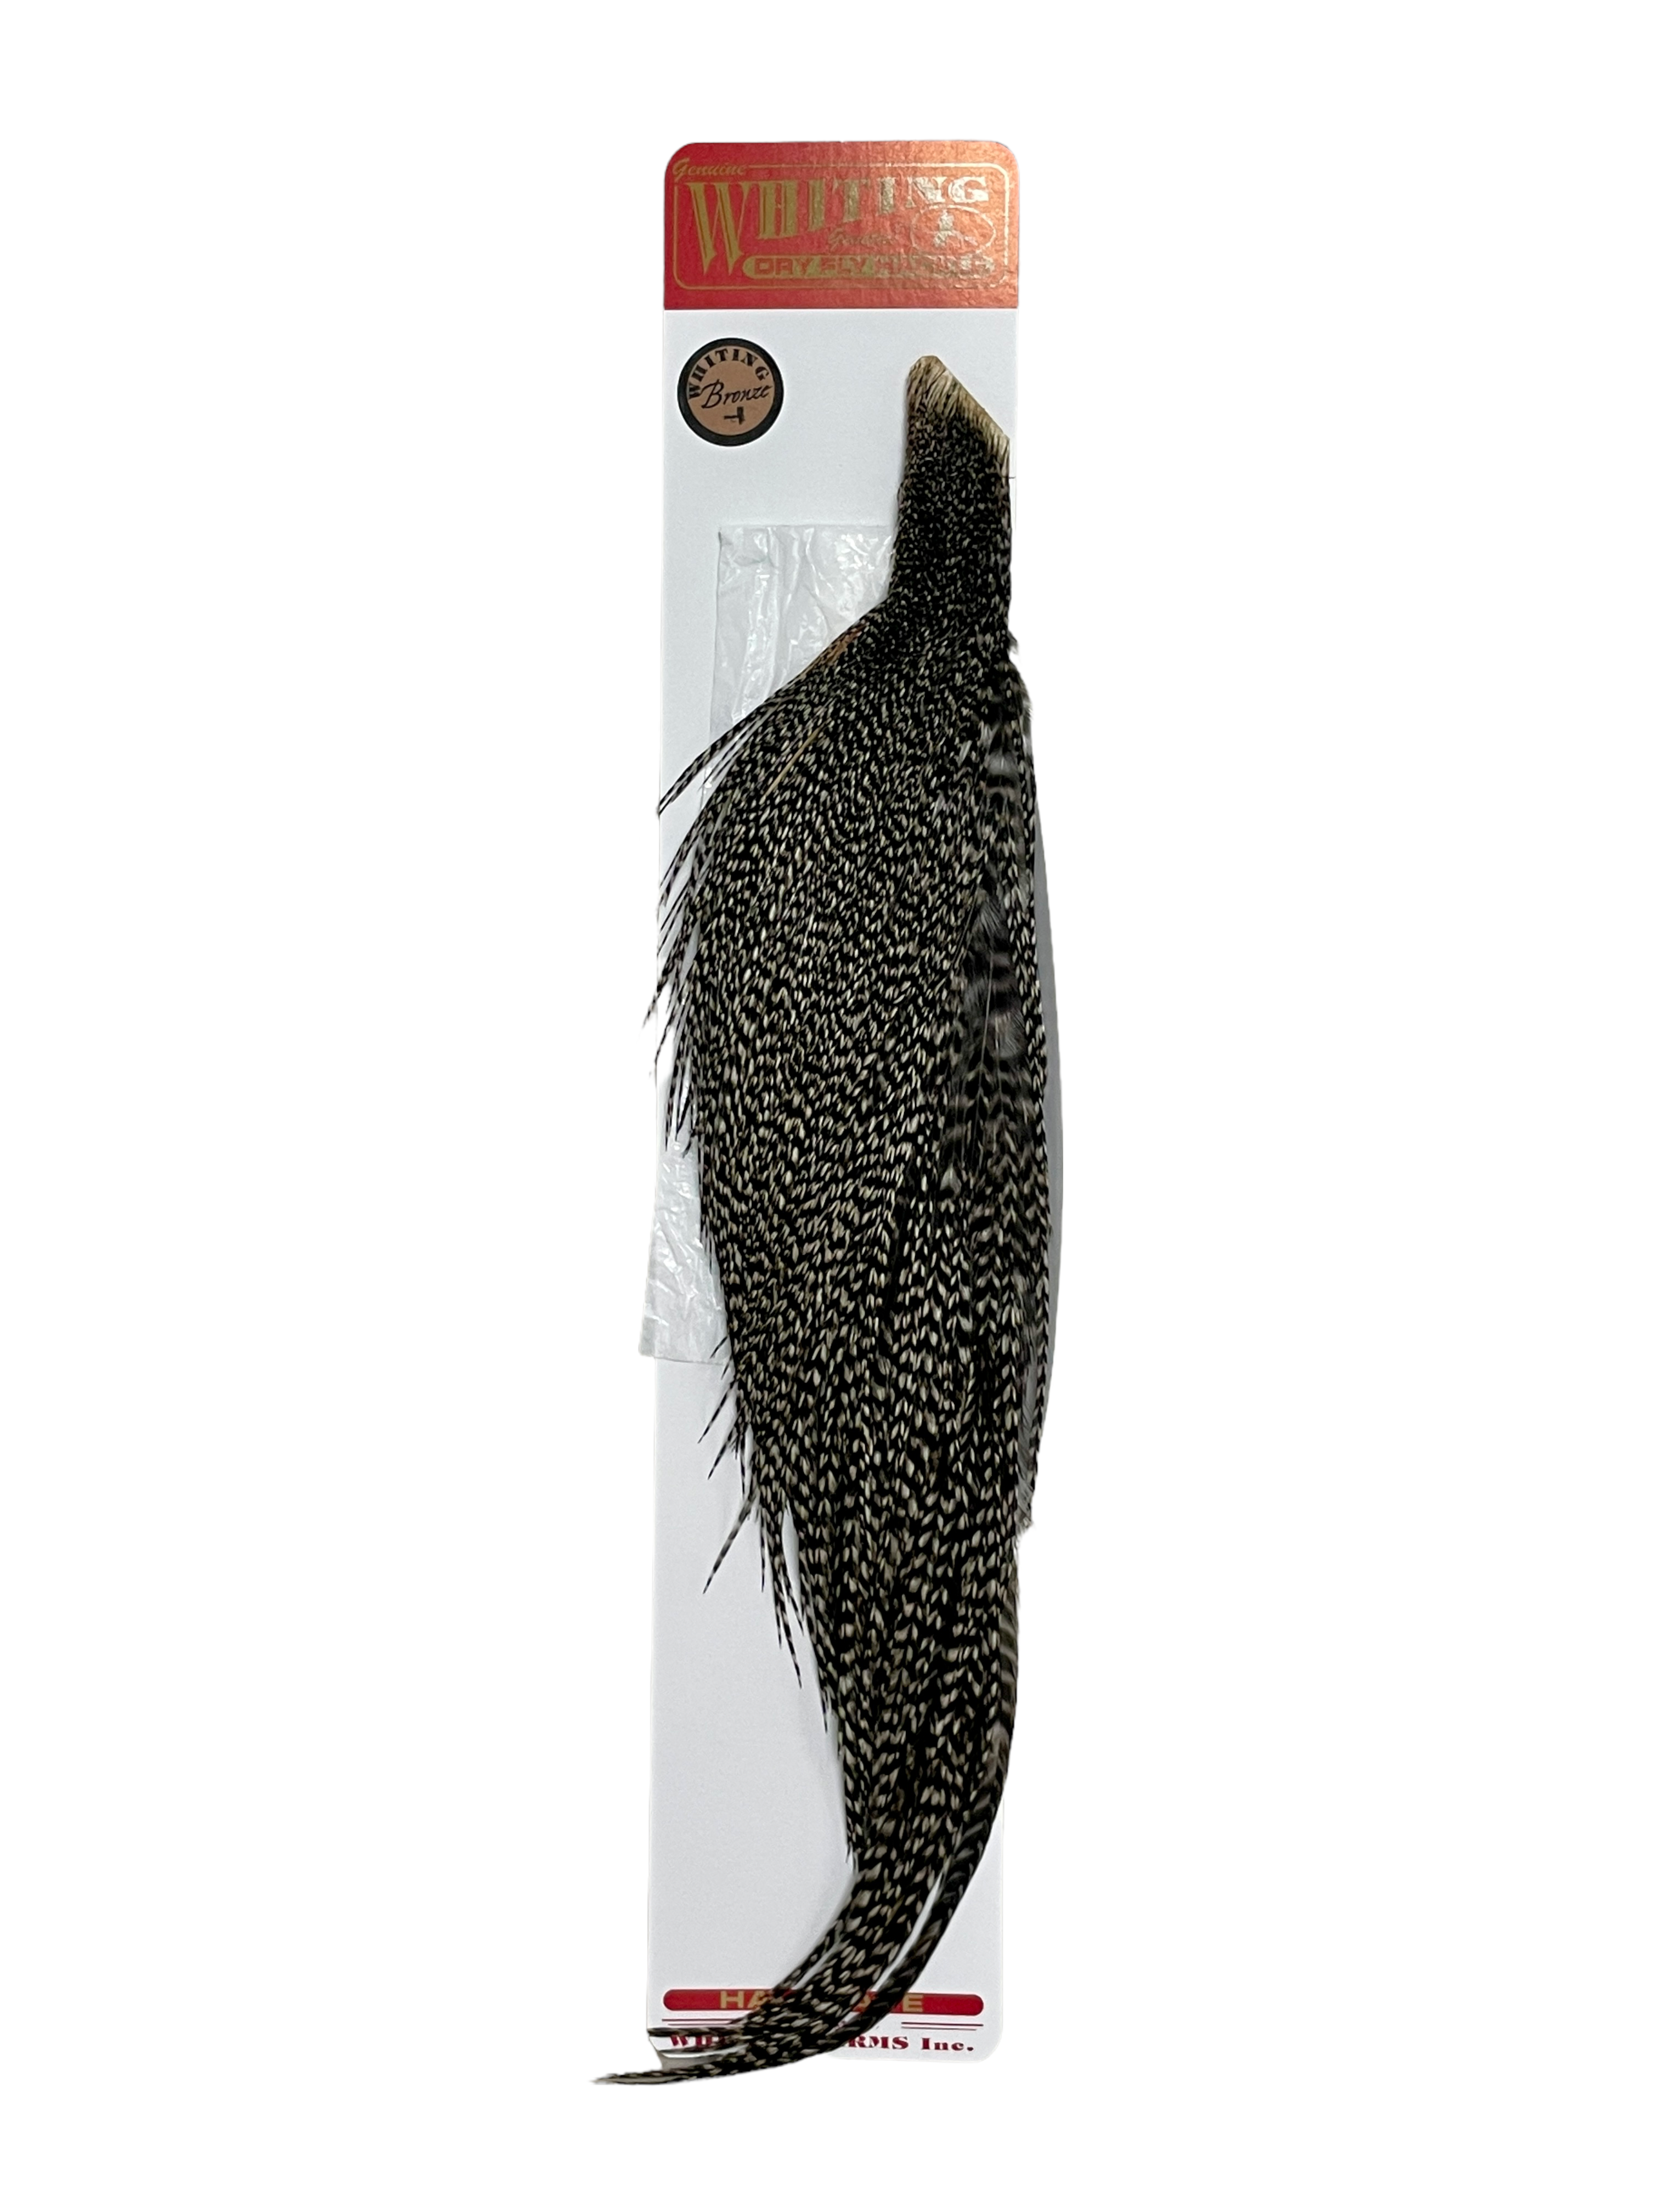 Whiting Half Cock Neck Capes (Bronze) - Upavon Fly Fishing